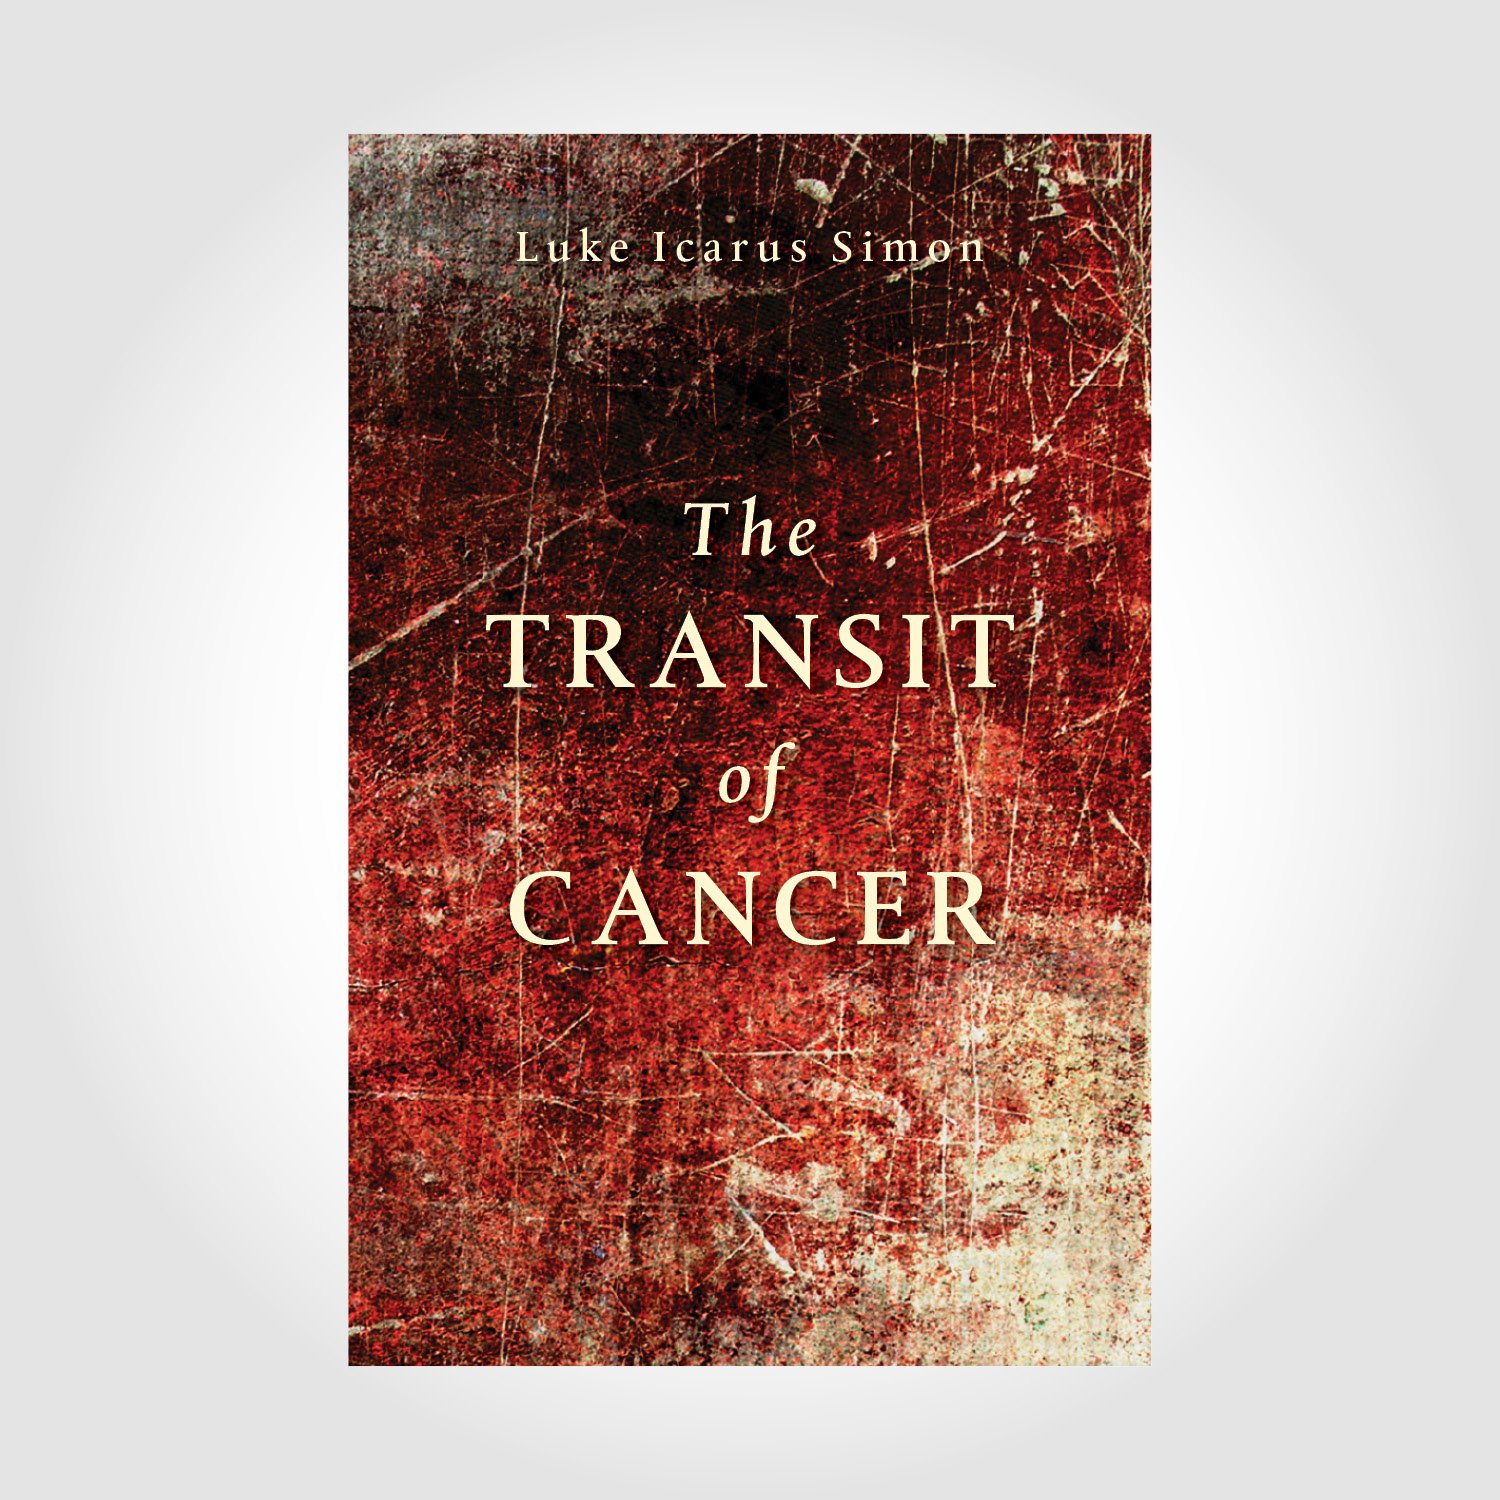 The Transit of Cancer